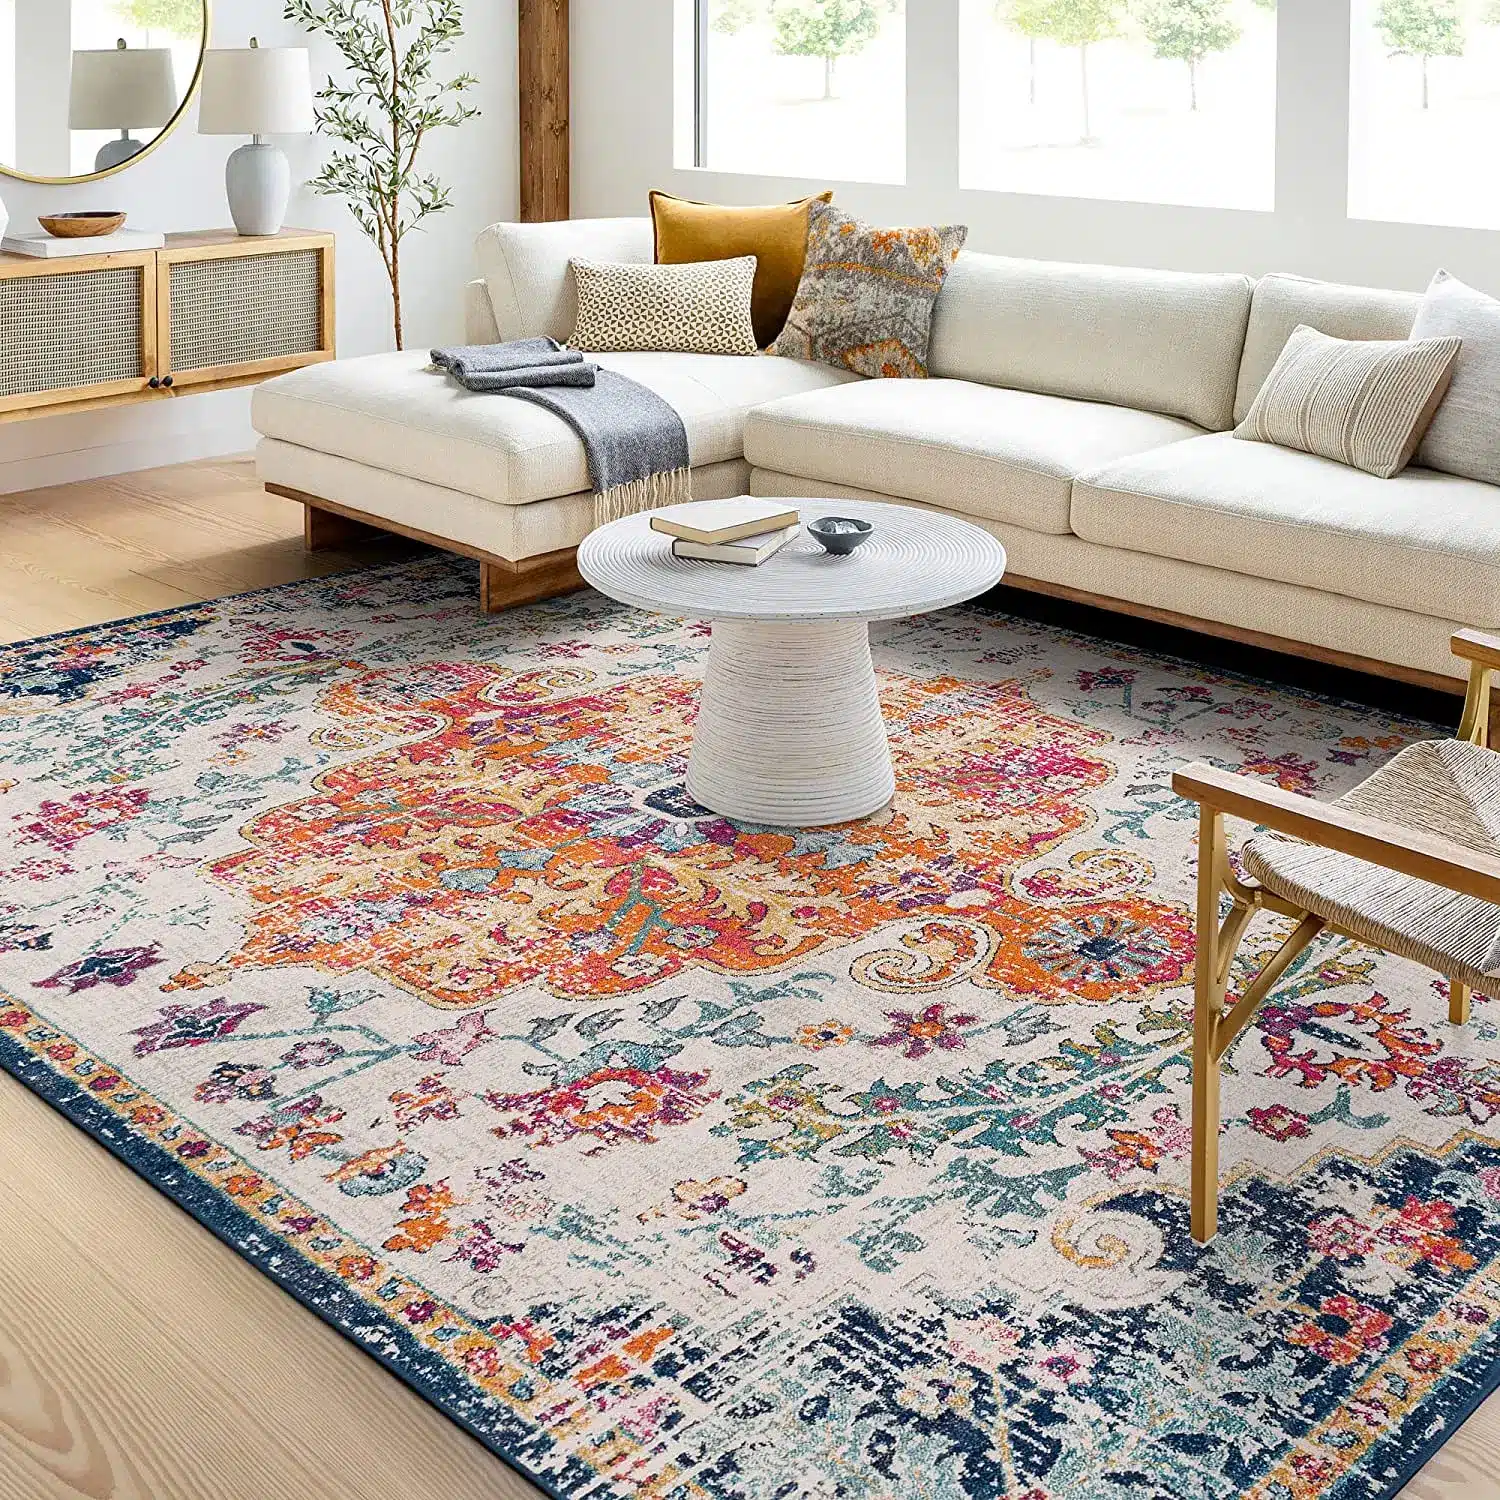 Persian-style and Moroccan-style rugs in their living room